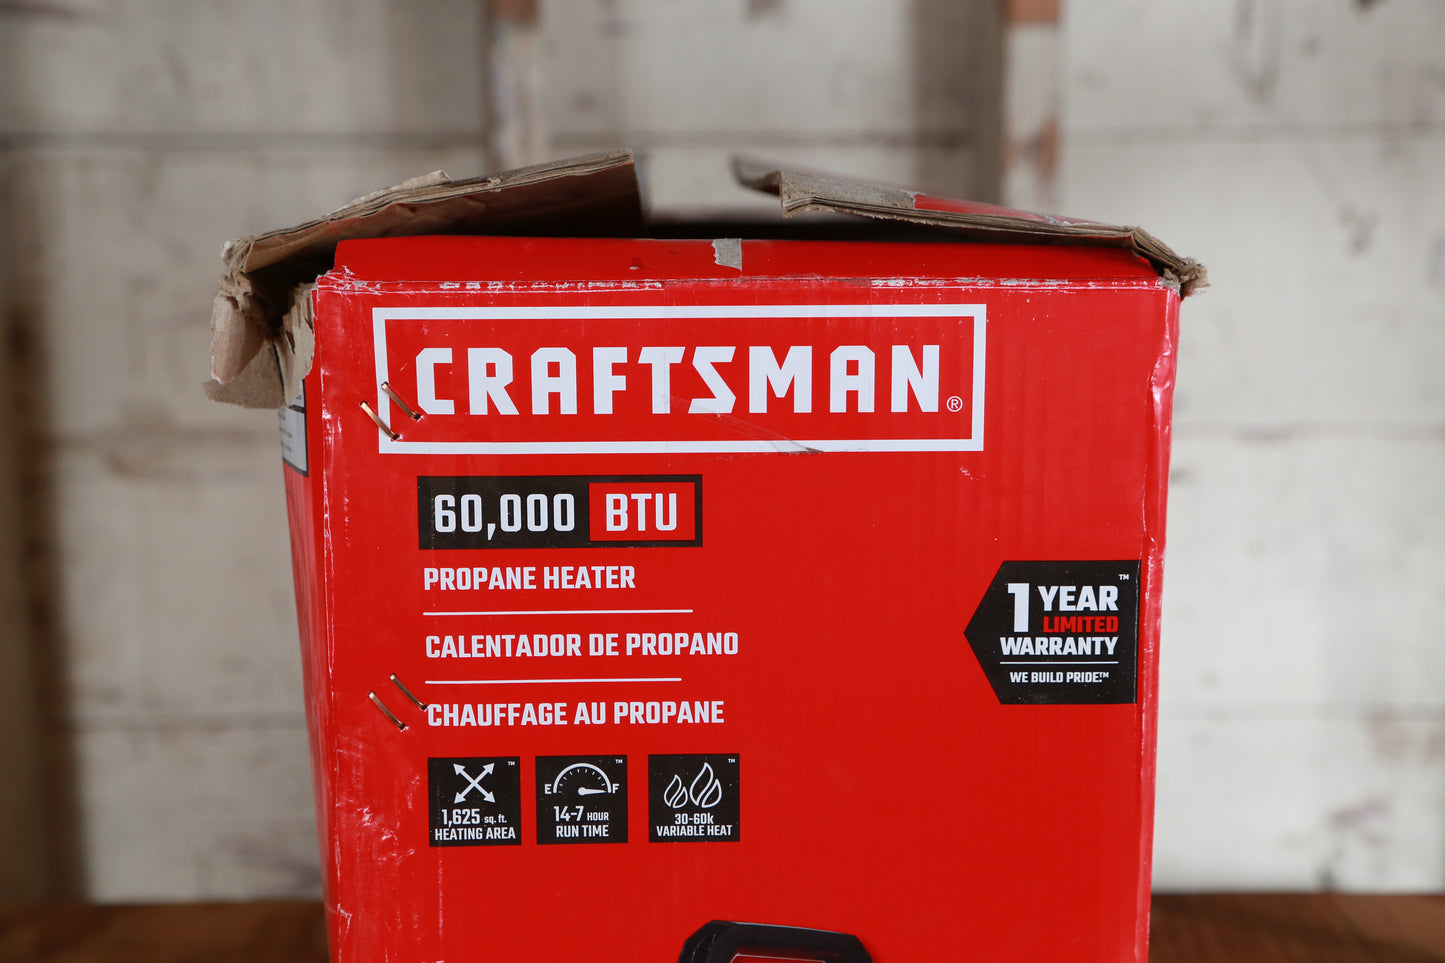 CRAFTSMAN Craftsman Forced Air Propane 60000-BTU Outdoor Portable Forced Air Propane Heater